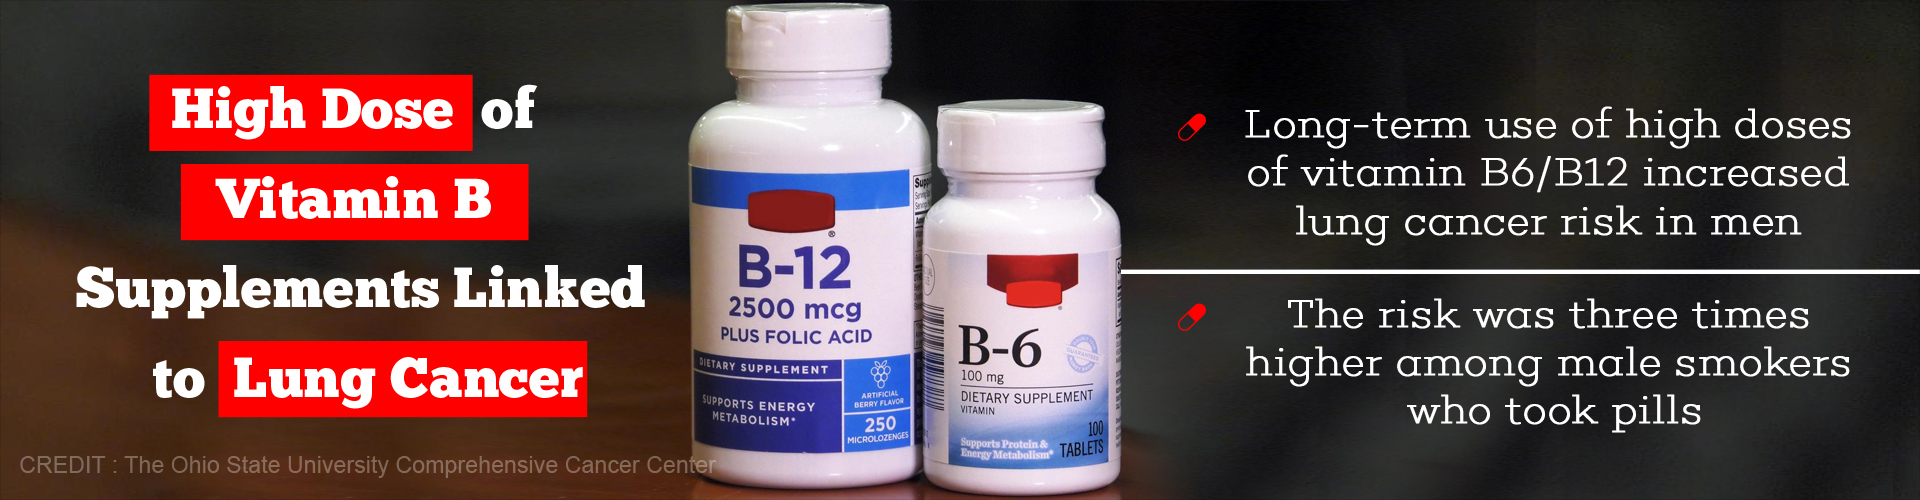 high dose of vitamin B supplements linked to lung cancer
- long-term use of high doses of vitamin B6/B12 increased lung cancer risk in men
- the risk was three times higher among male smokers who took pills